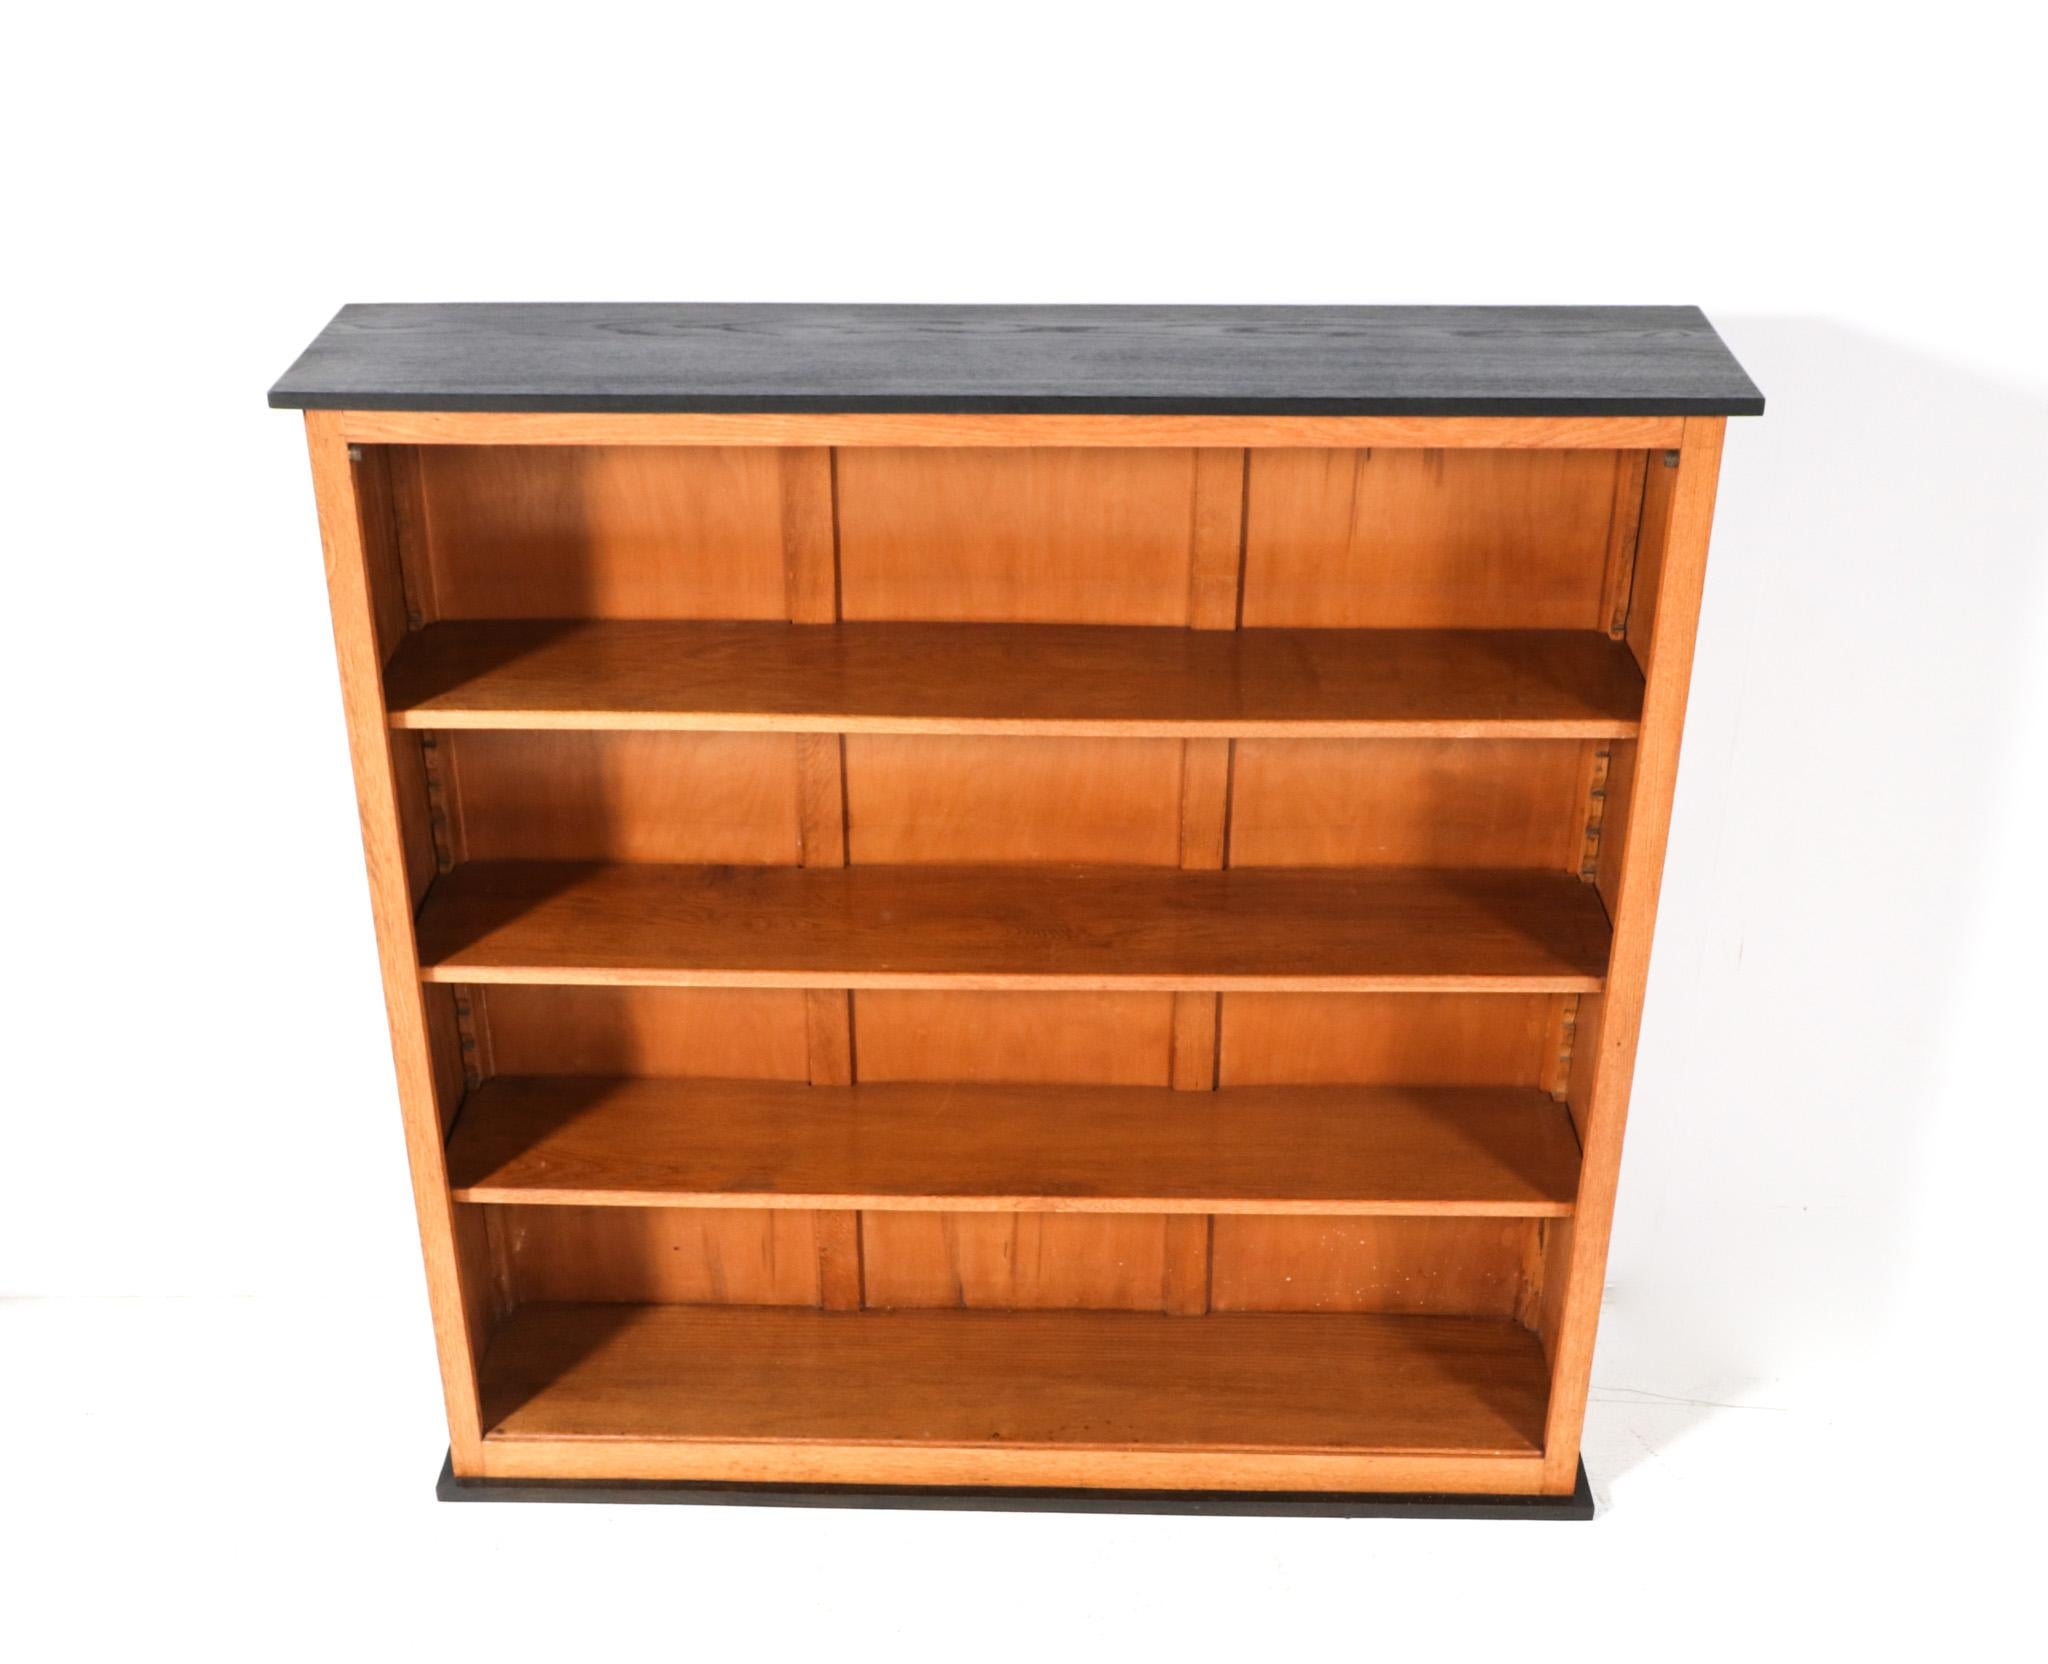 Stunning and rare Art Deco Modernist open bookcase.
Design by Jan Brunott.
Striking Dutch design from the 1920s.
Solid oak base with original black lacquered top and lining.
Three original solid oak shelves, adjustable in height.
In very good